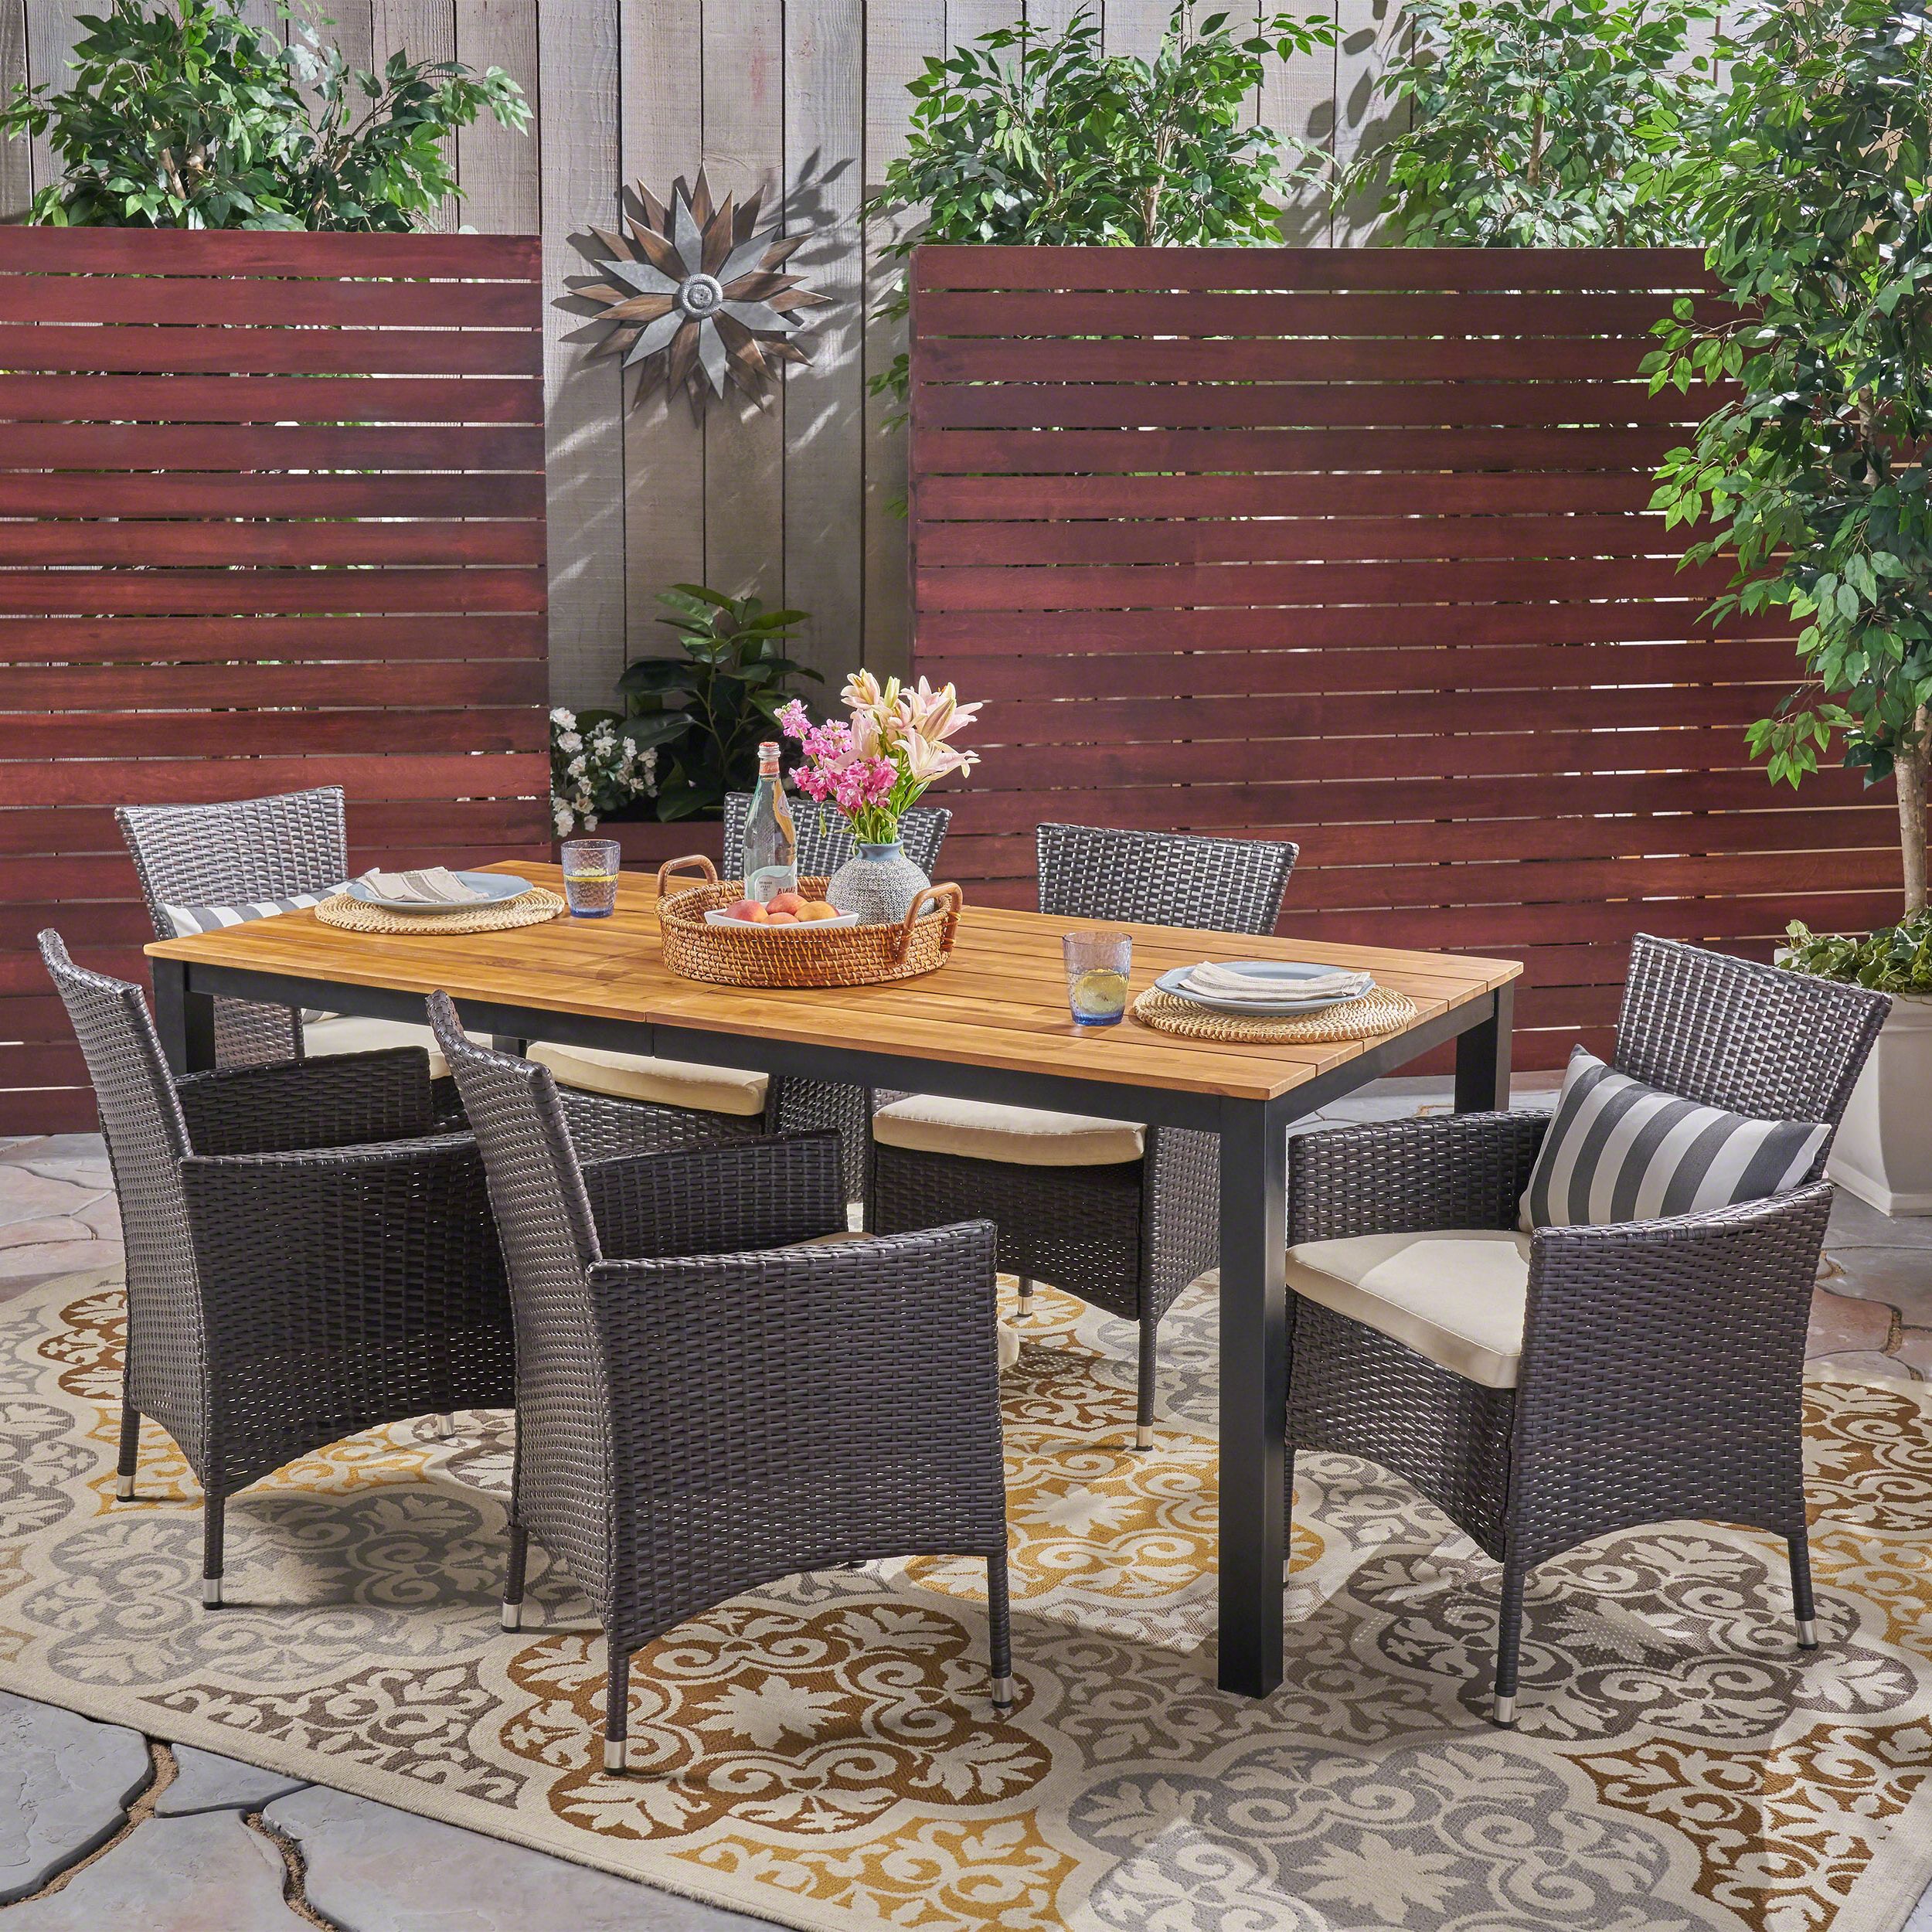 Vienna Outdoor 7 Piece Acacia Wood Dining Set With Wicker Chairs And In Well Liked Teak And Wicker Dining Sets (View 7 of 16)